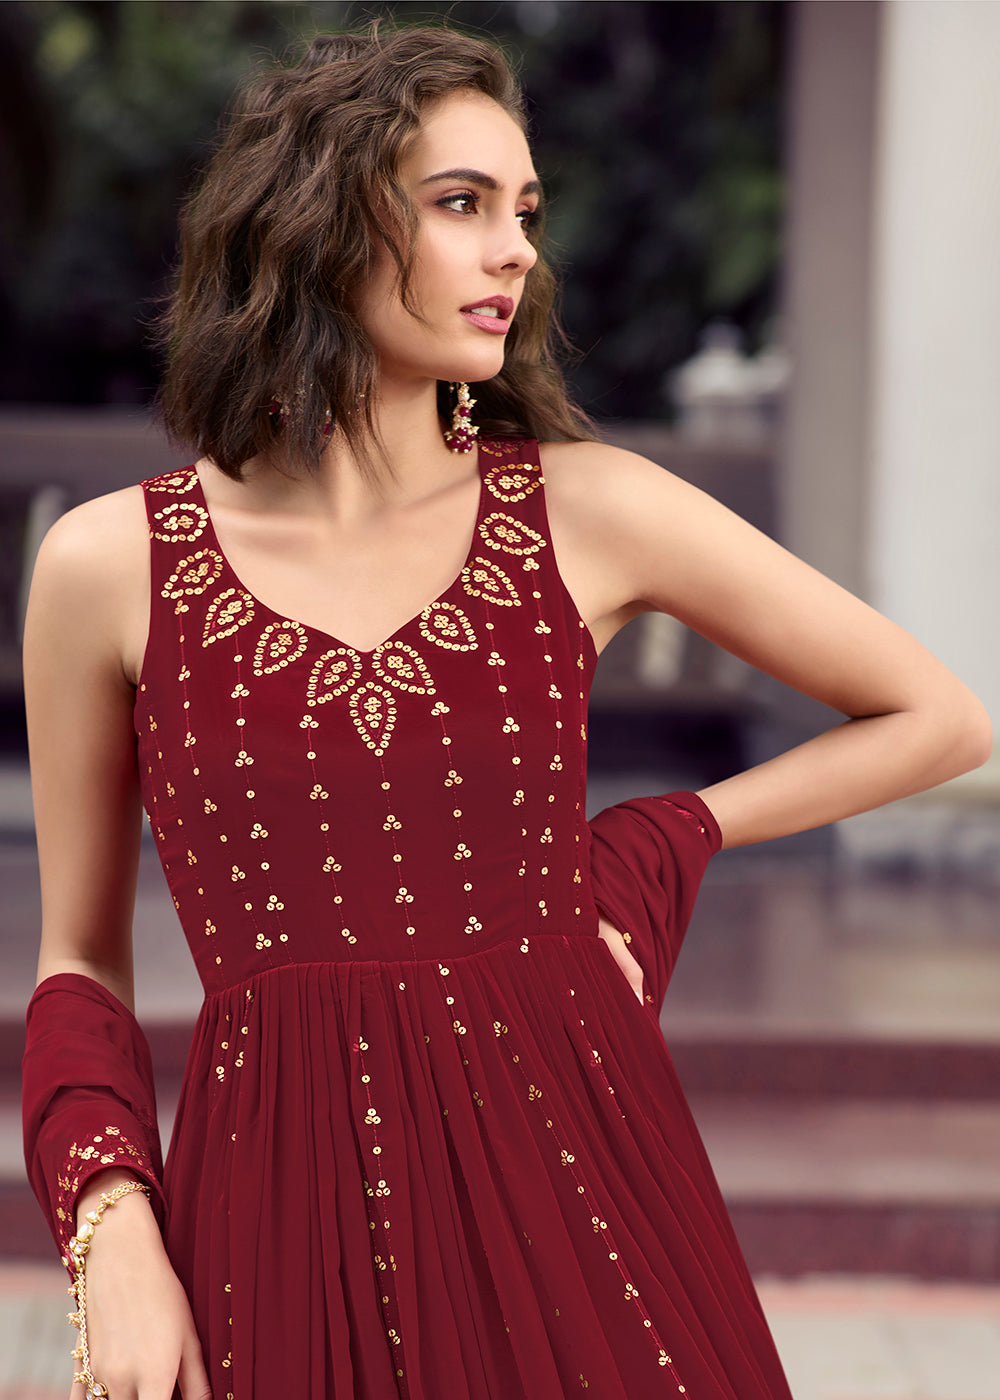 Latest Asian Umbrella Style Dresses & Frocks Designs 2022-23 Collection |  Beautiful frock design, Frock design, Beautiful frocks